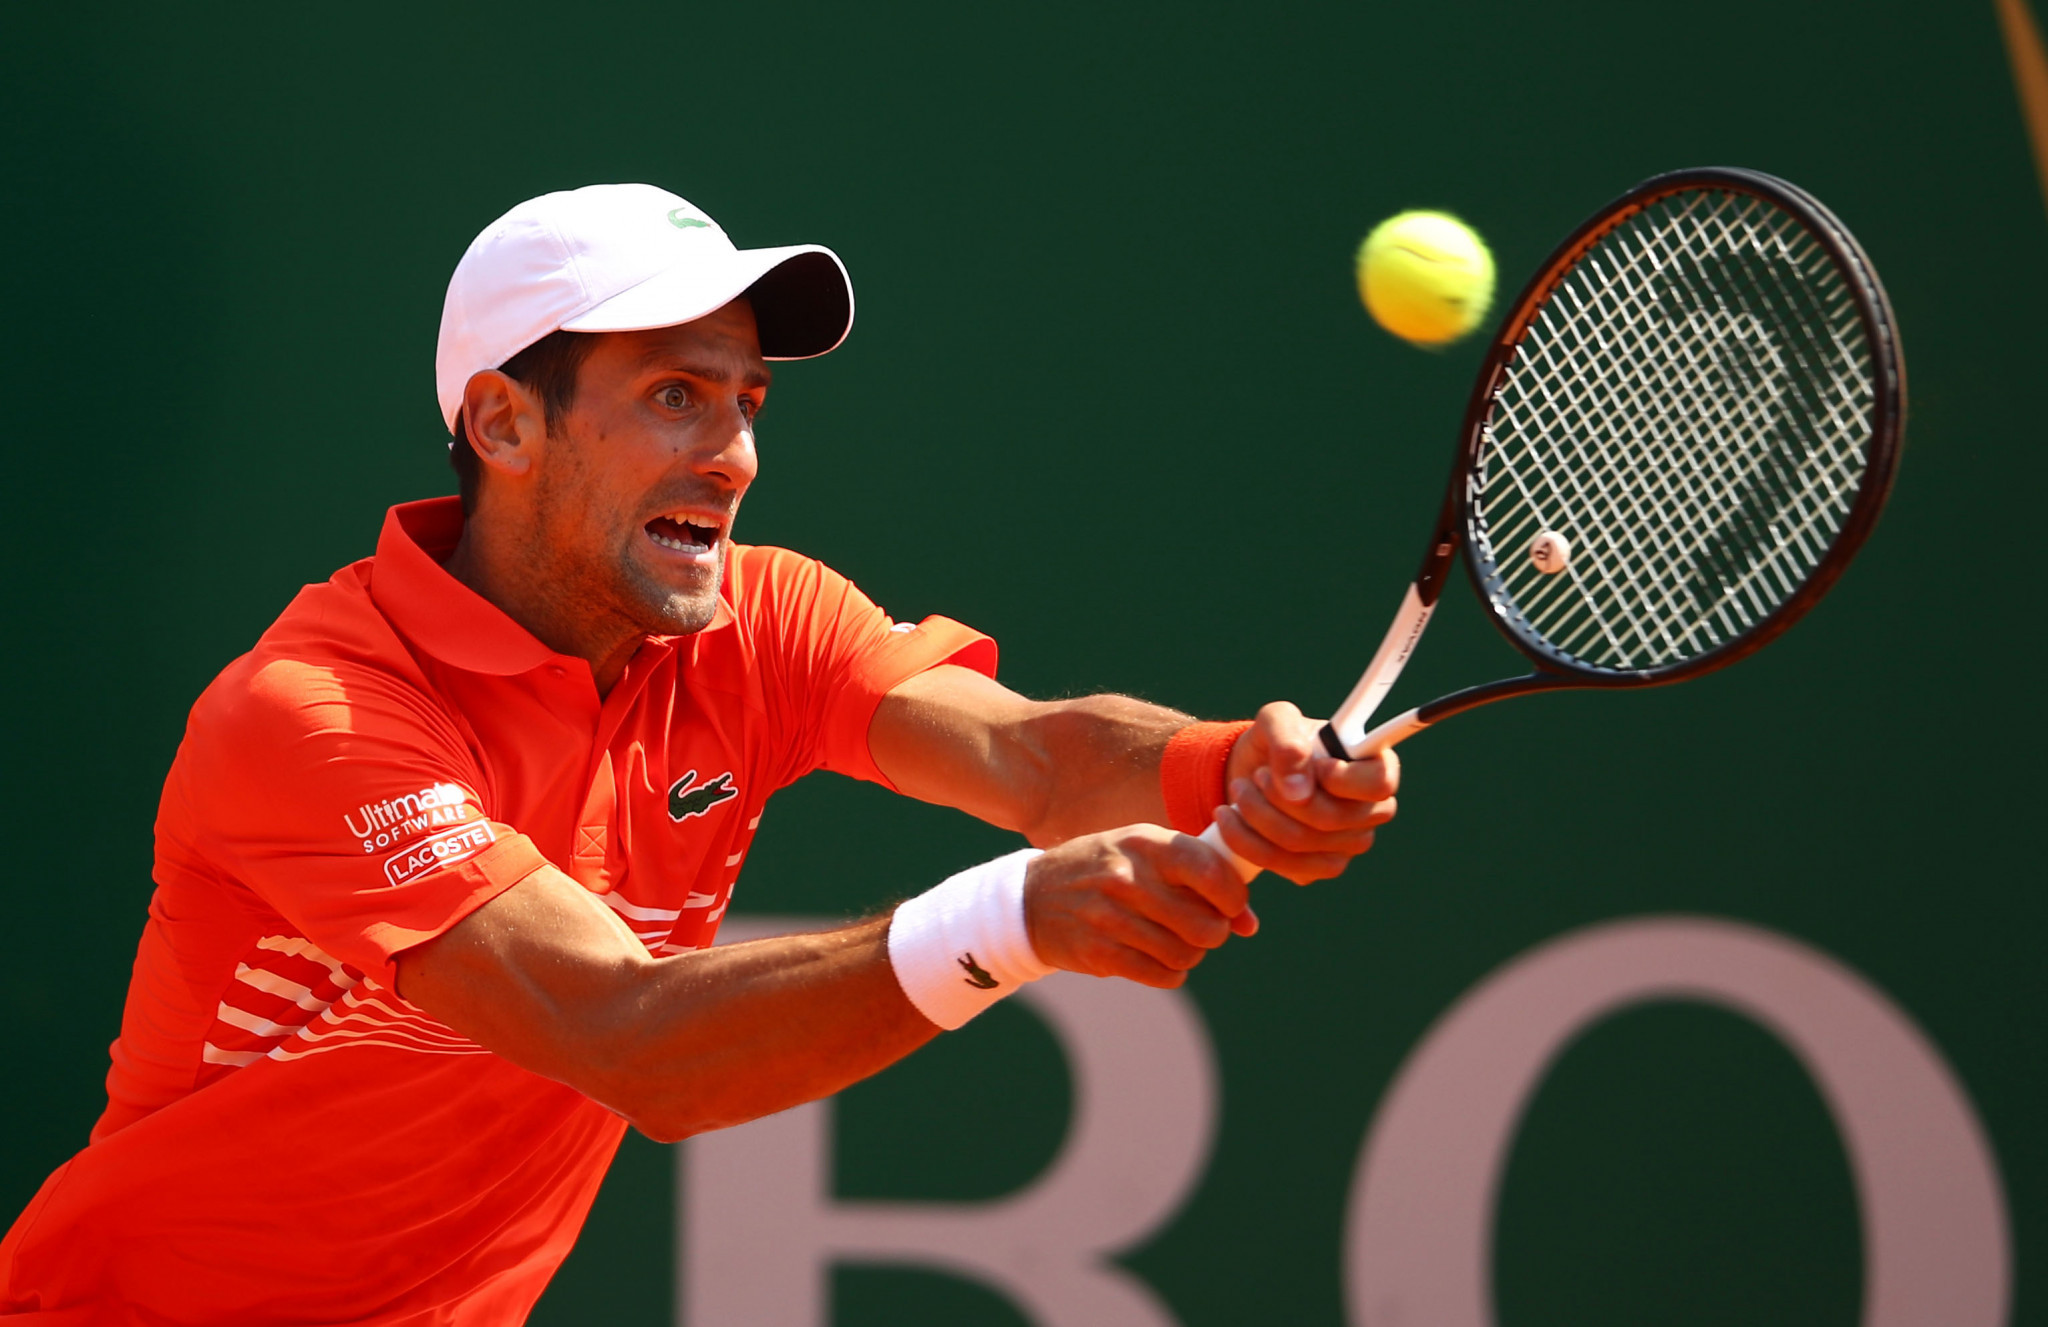 World number one Djokovic eases into Monte-Carlo Masters quarter-final